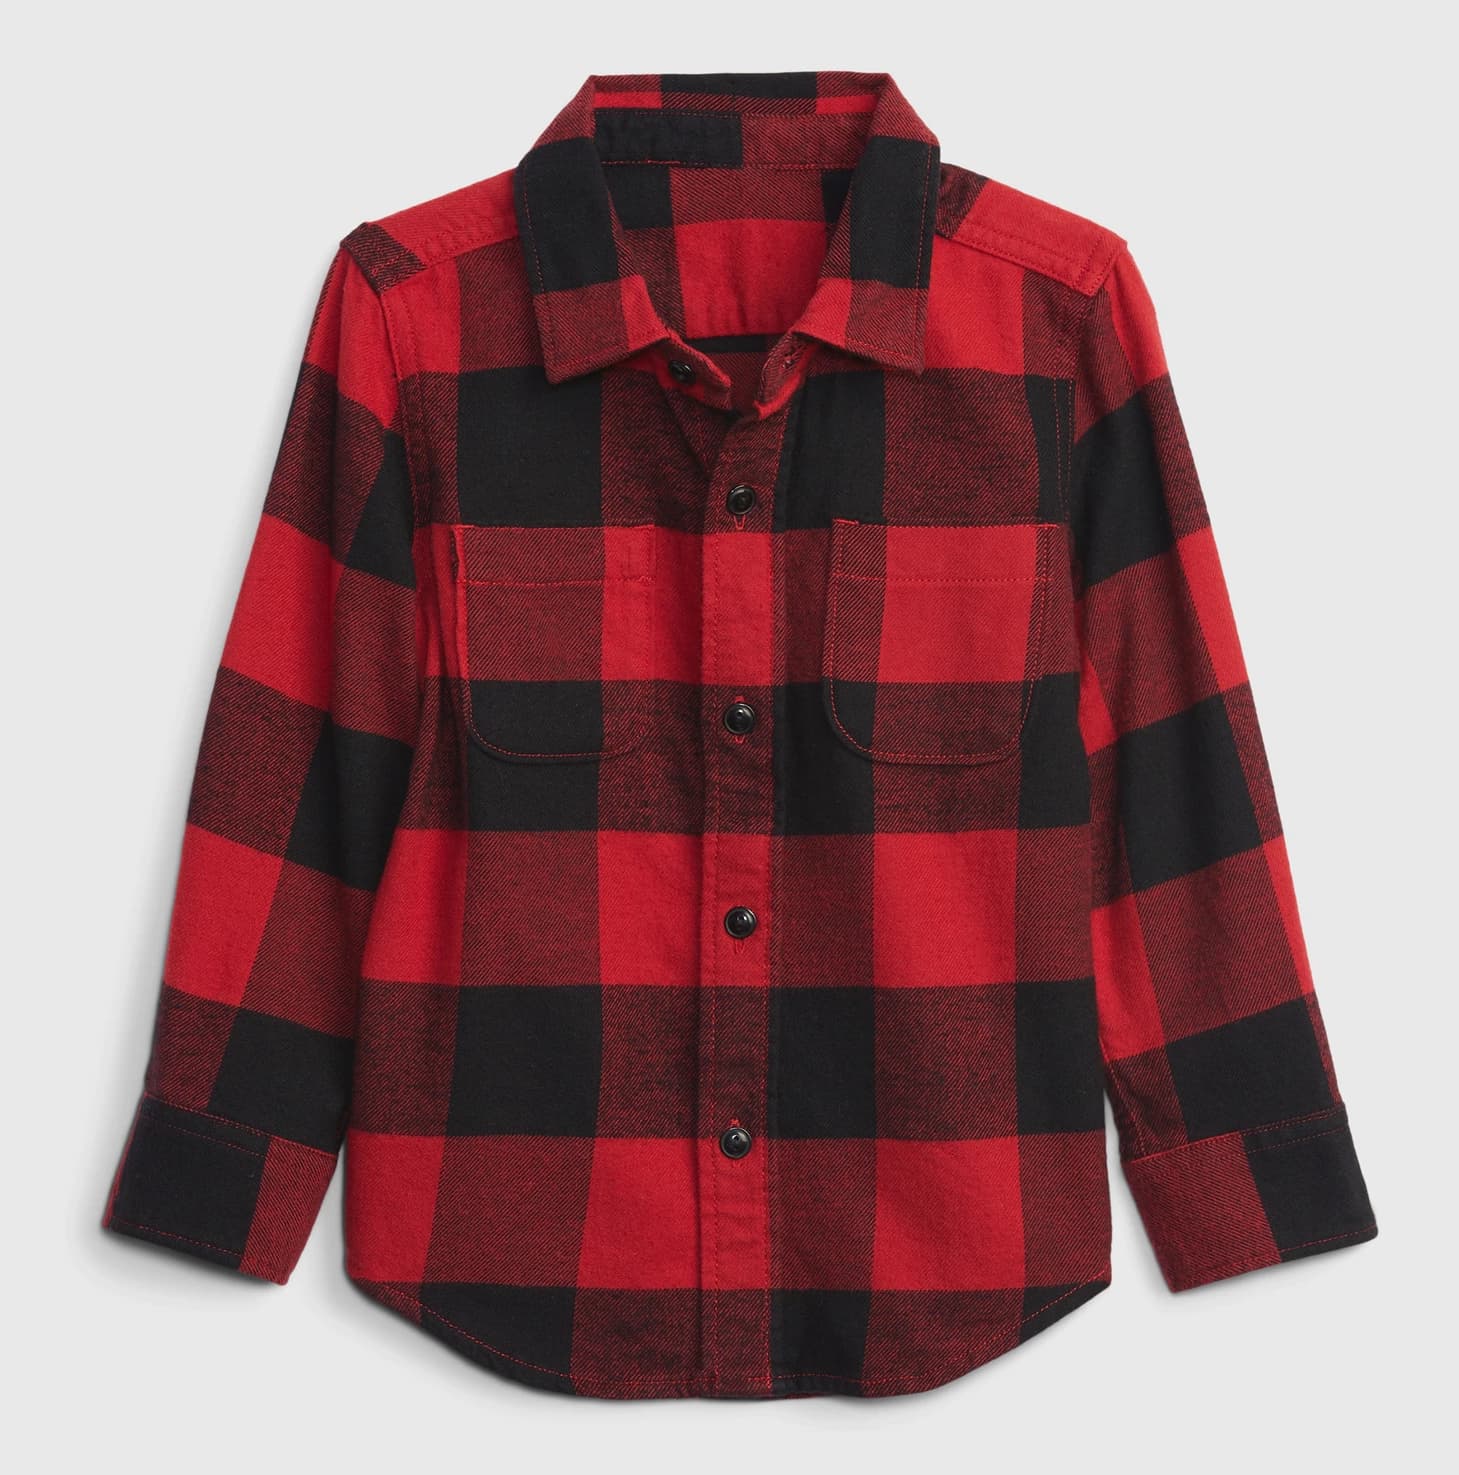 Red and black flannel shirt